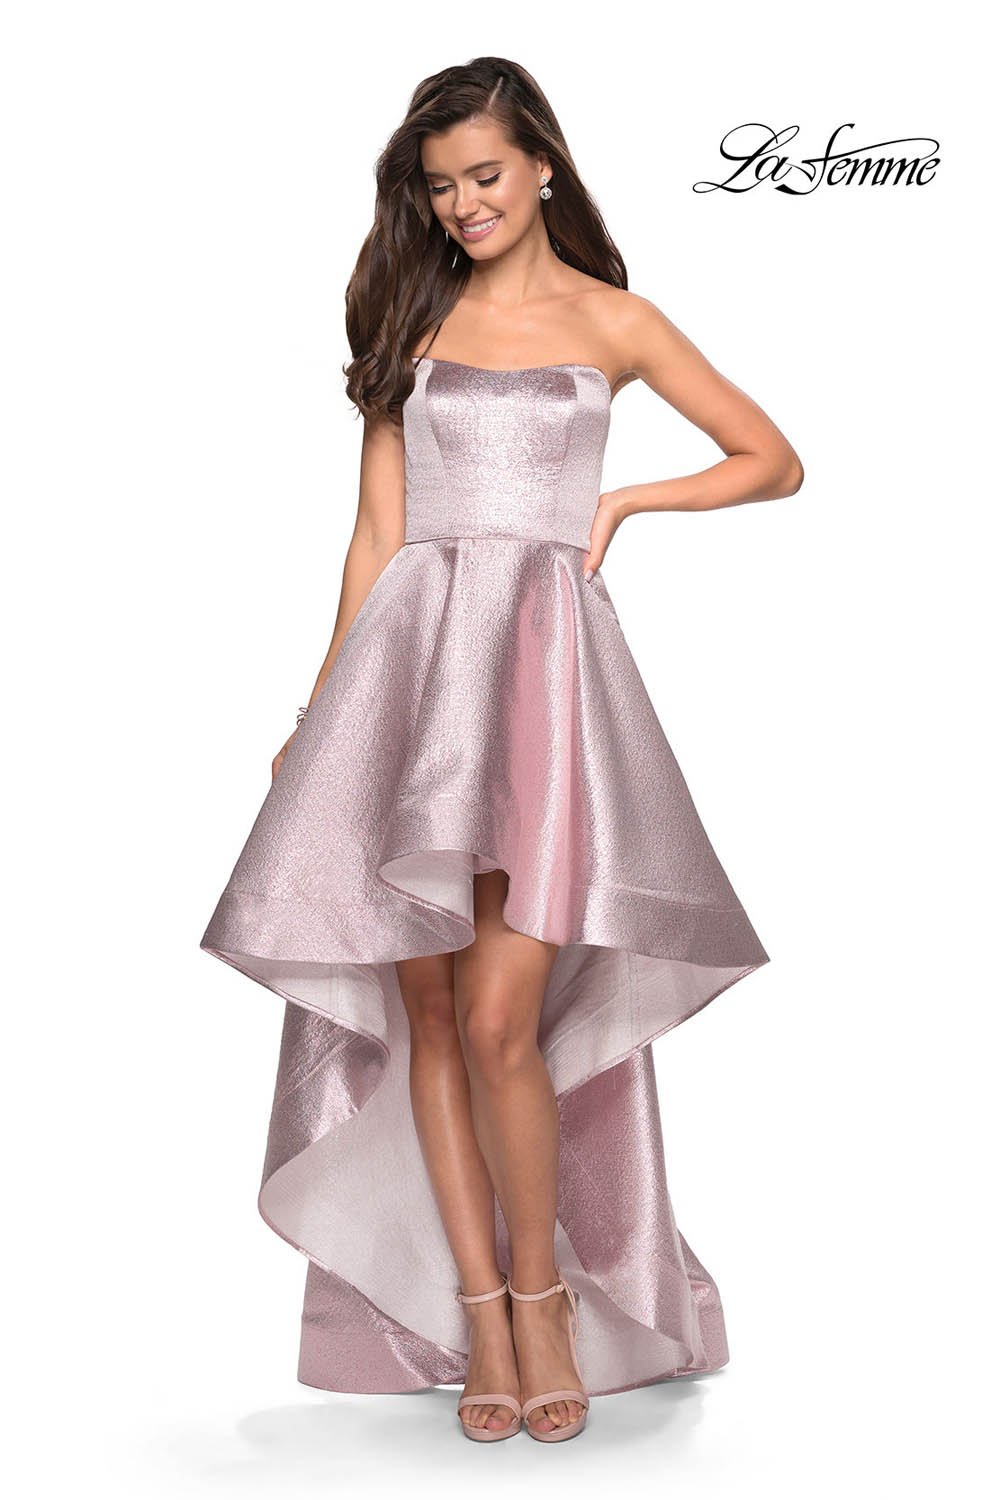 La Femme 27783 dress images in these colors: Pink.